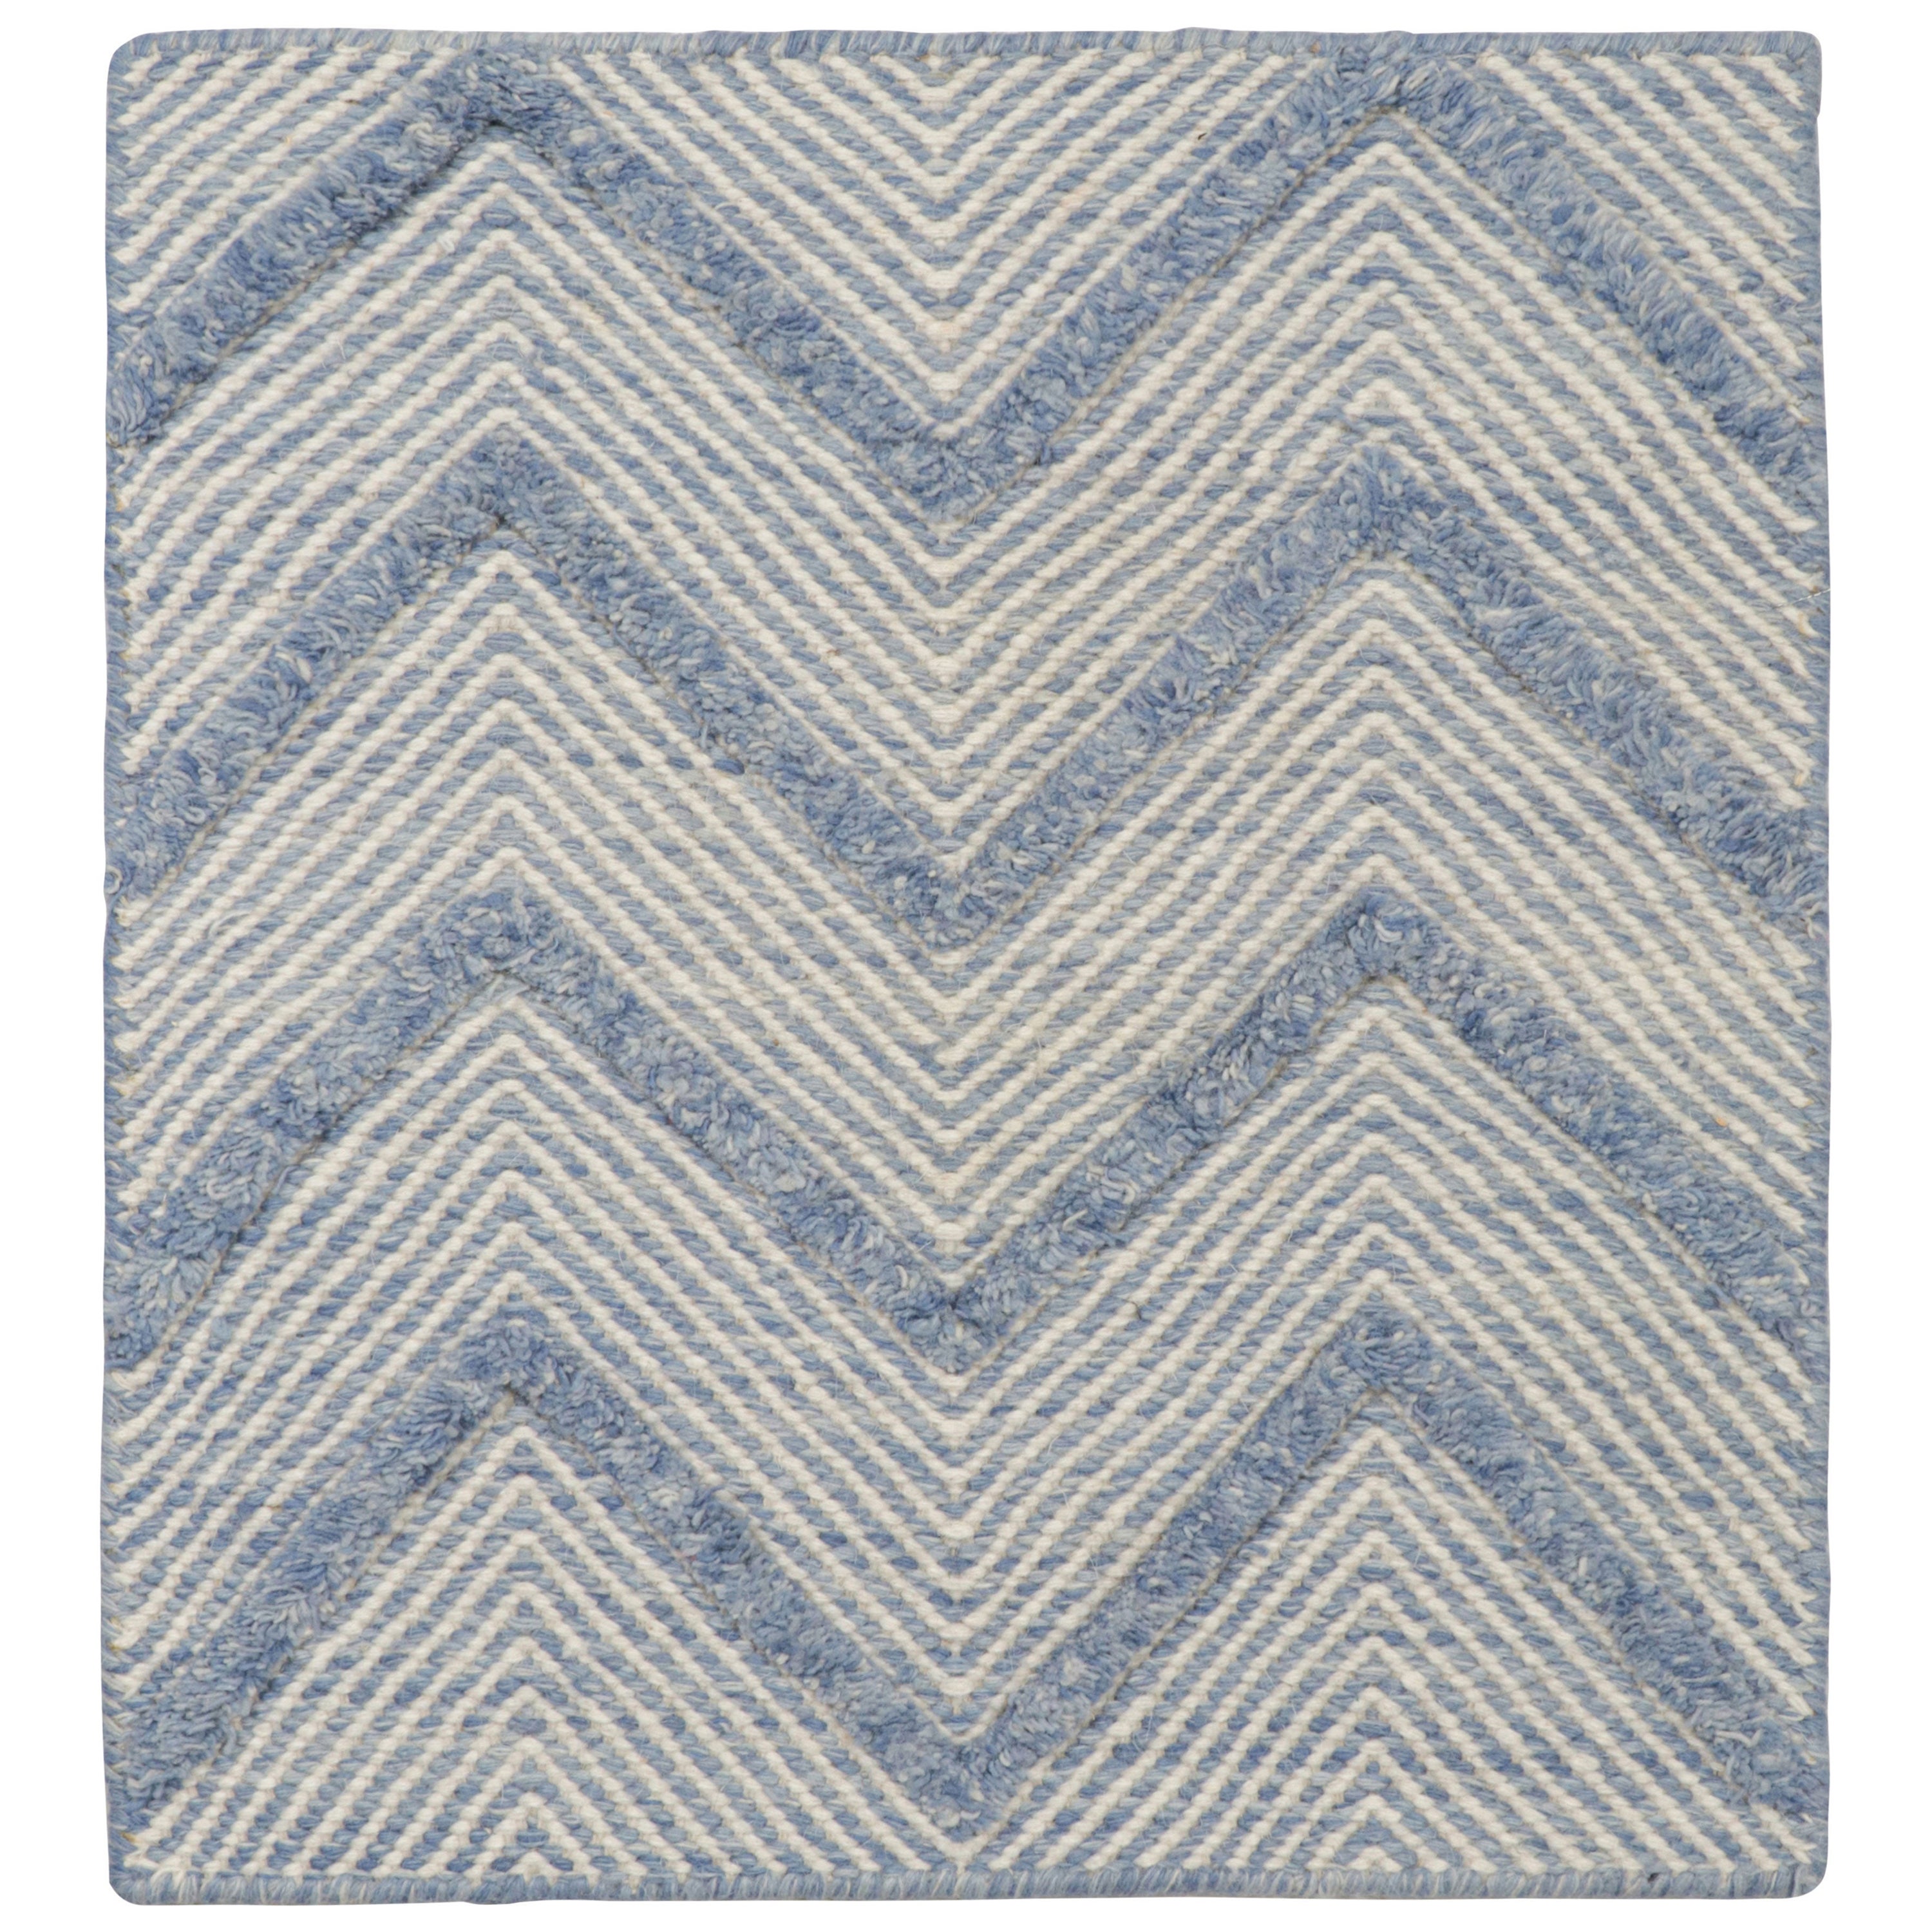 Rug & Kilim’s Contemporary Scatter Rug with White and Blue Chevron Patterns 